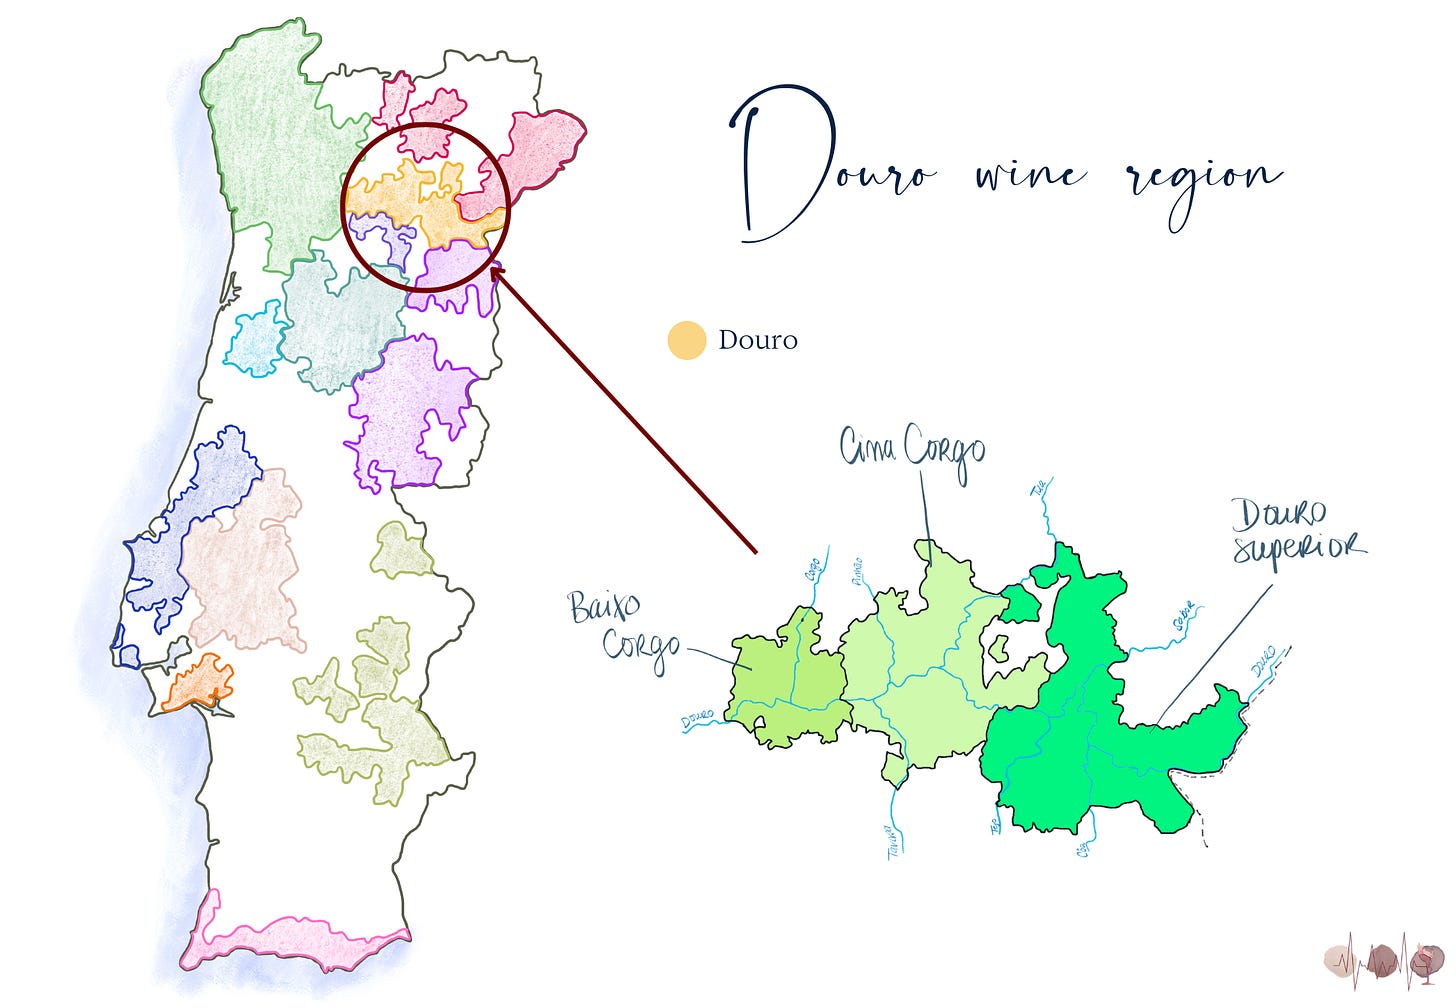 Douro wine region map and Portugal wine region map by Kate of Survives on wine